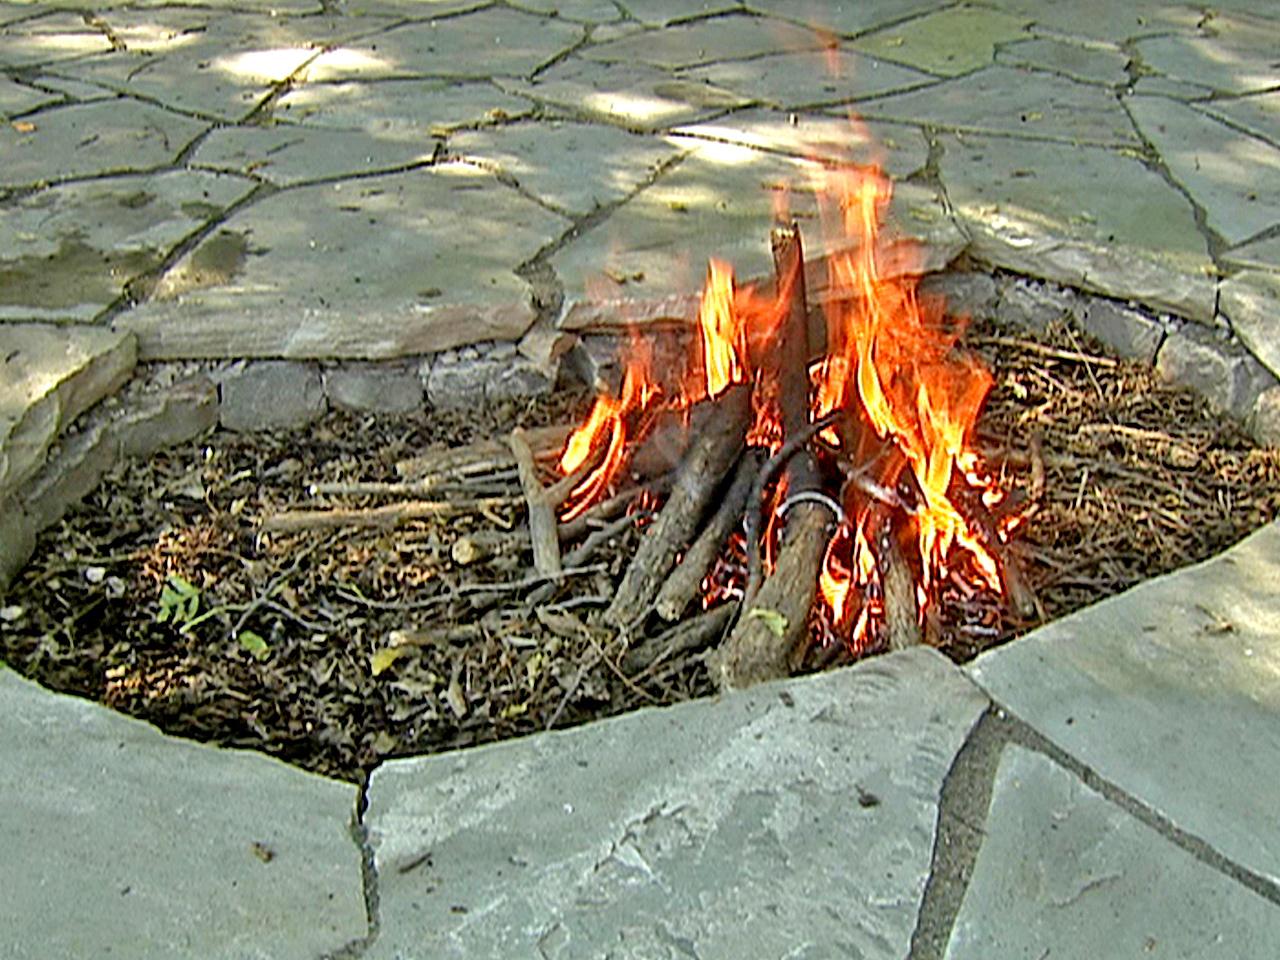 Outdoor Fire Pits And Pit Safety, Are Fire Pits Good